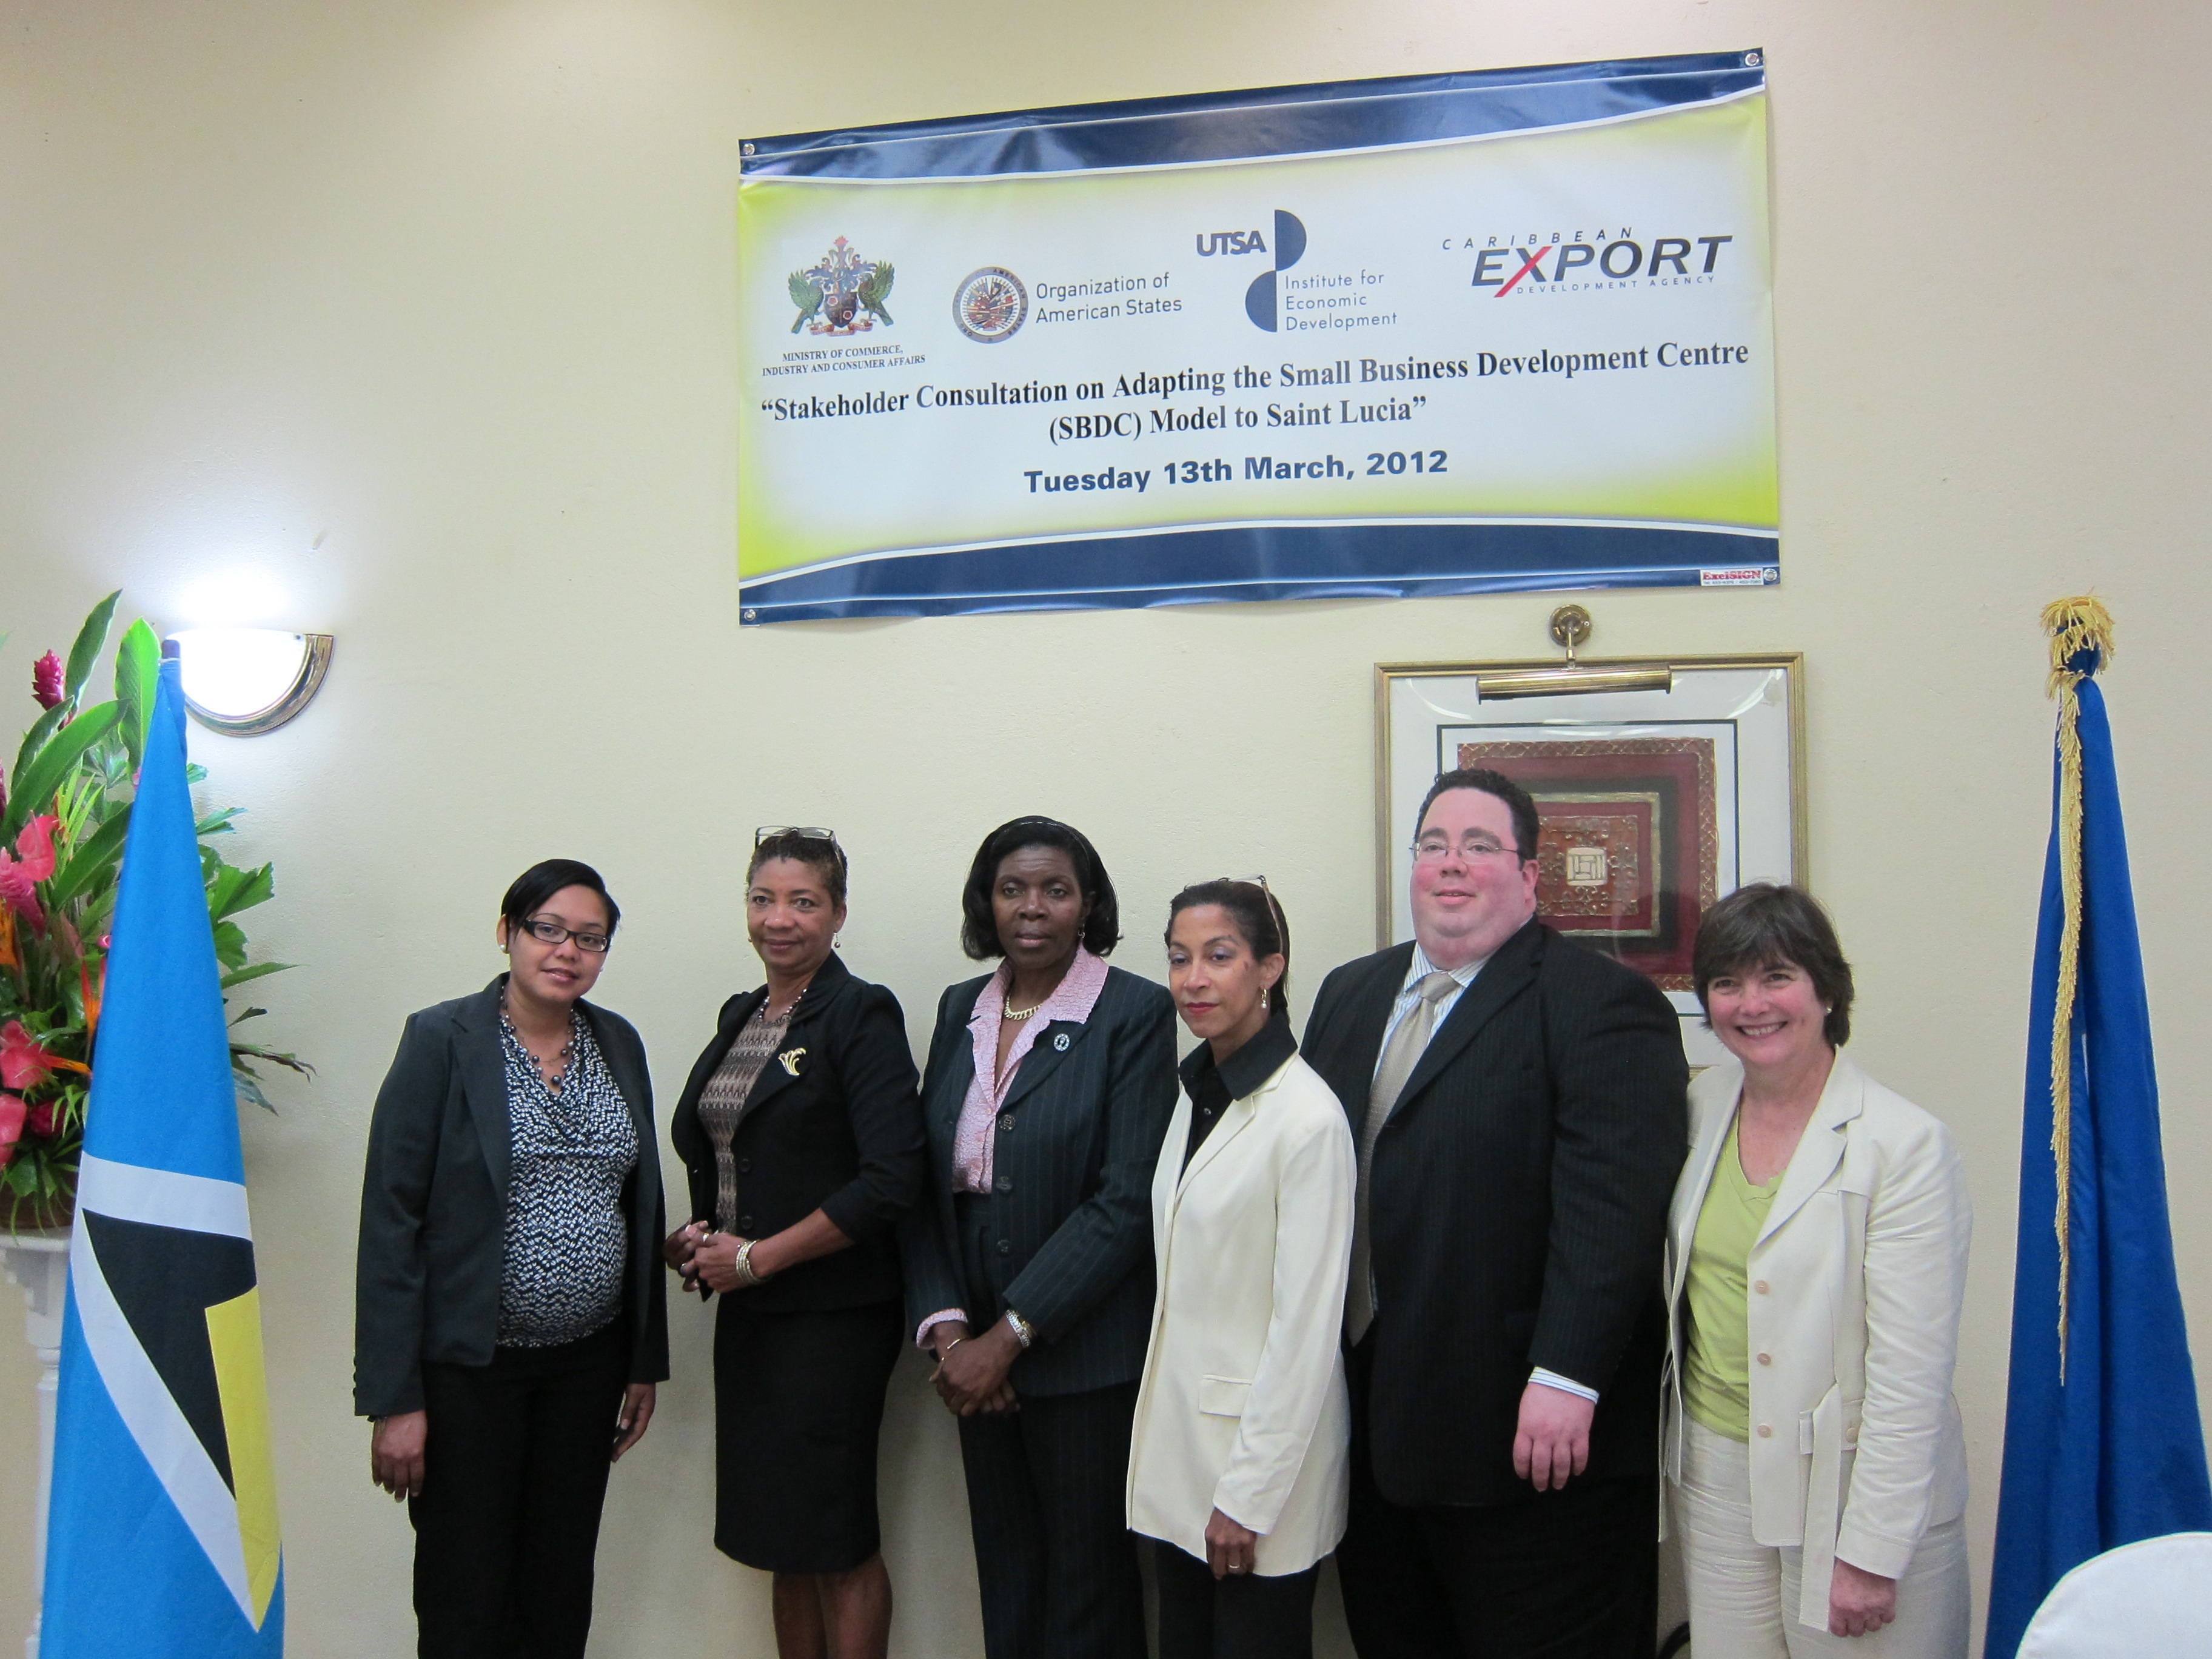 Stakeholder Consultation on Adapting the SBDC Model to Saint Lucia(March 13, 2012)